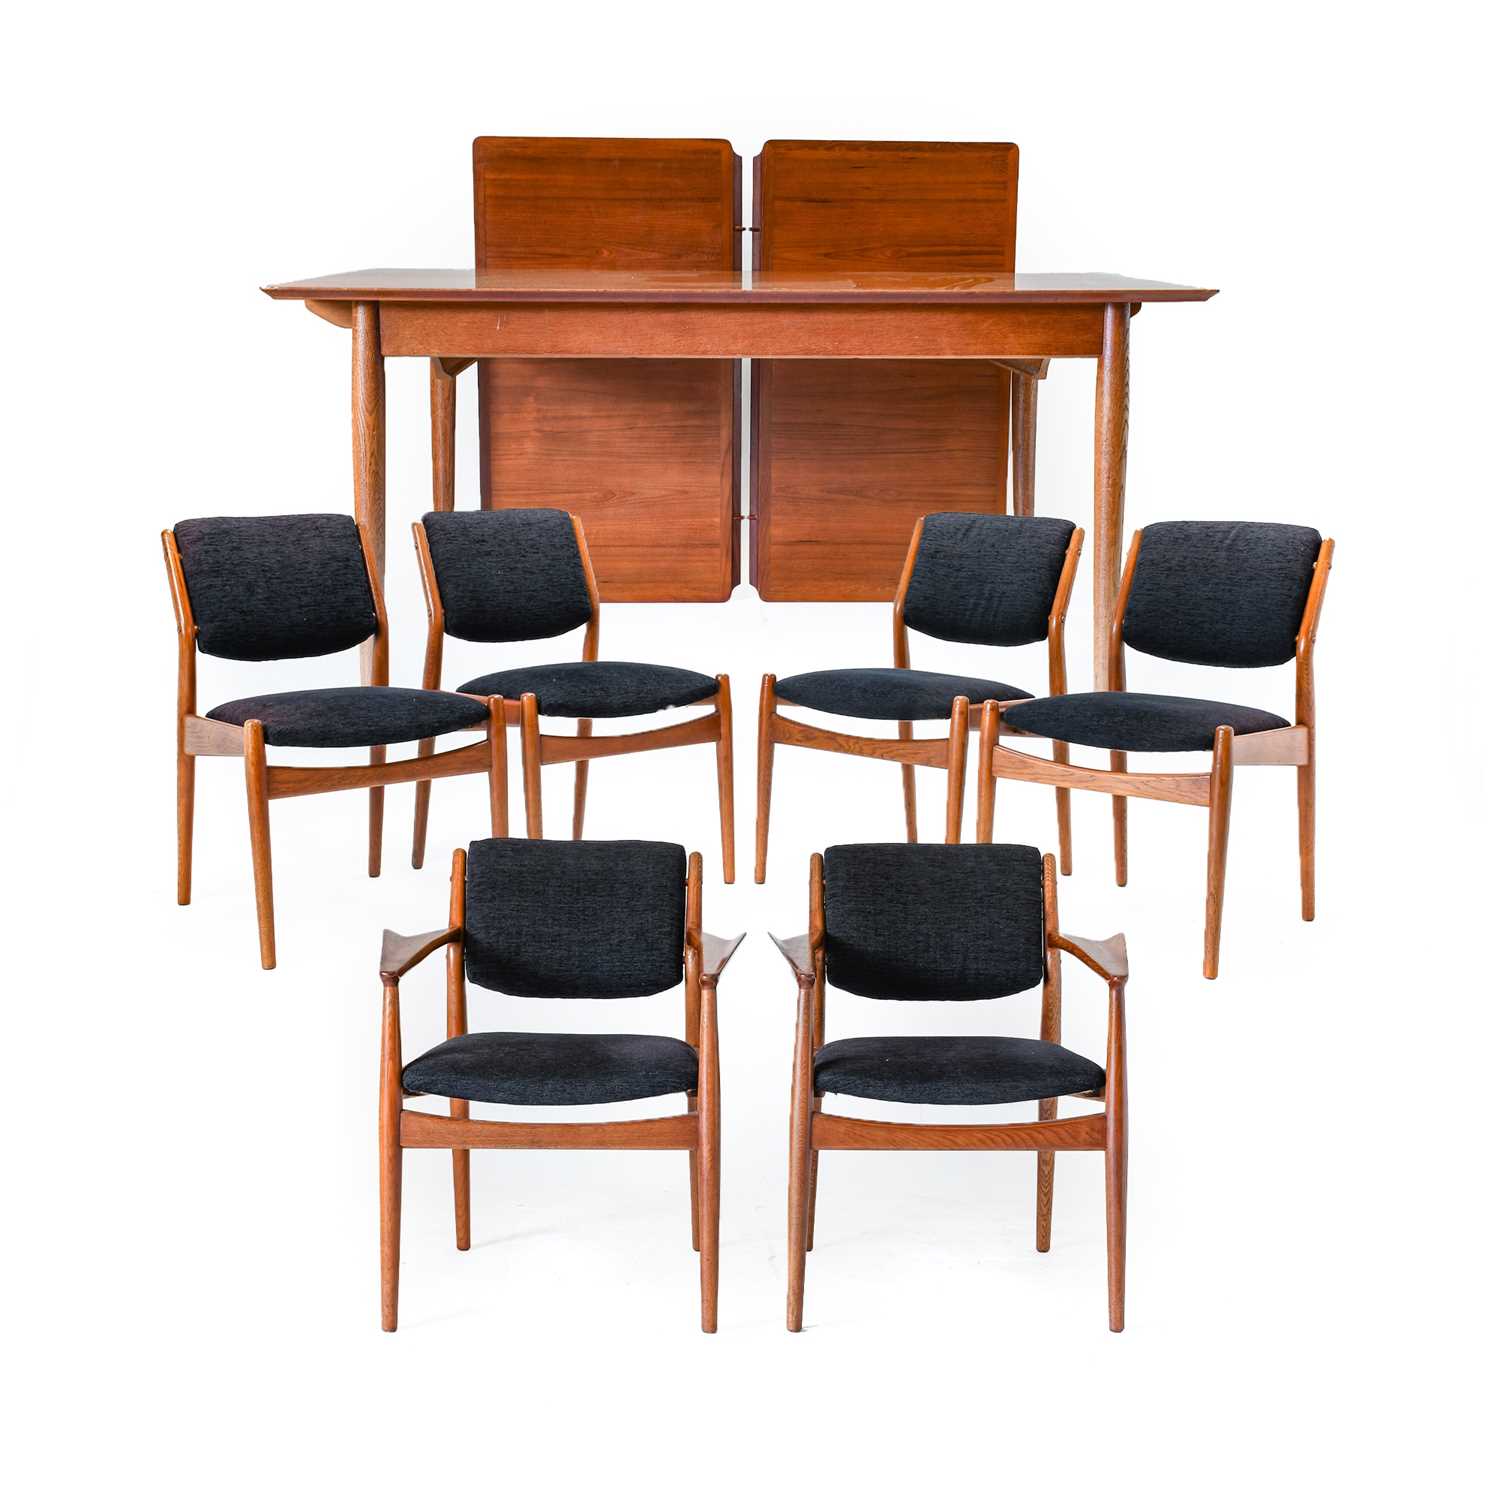 A Danish Sibast Teak and Oak Dining Room Suite, 1958/9, comprising an Extending Table, on four - Image 2 of 2